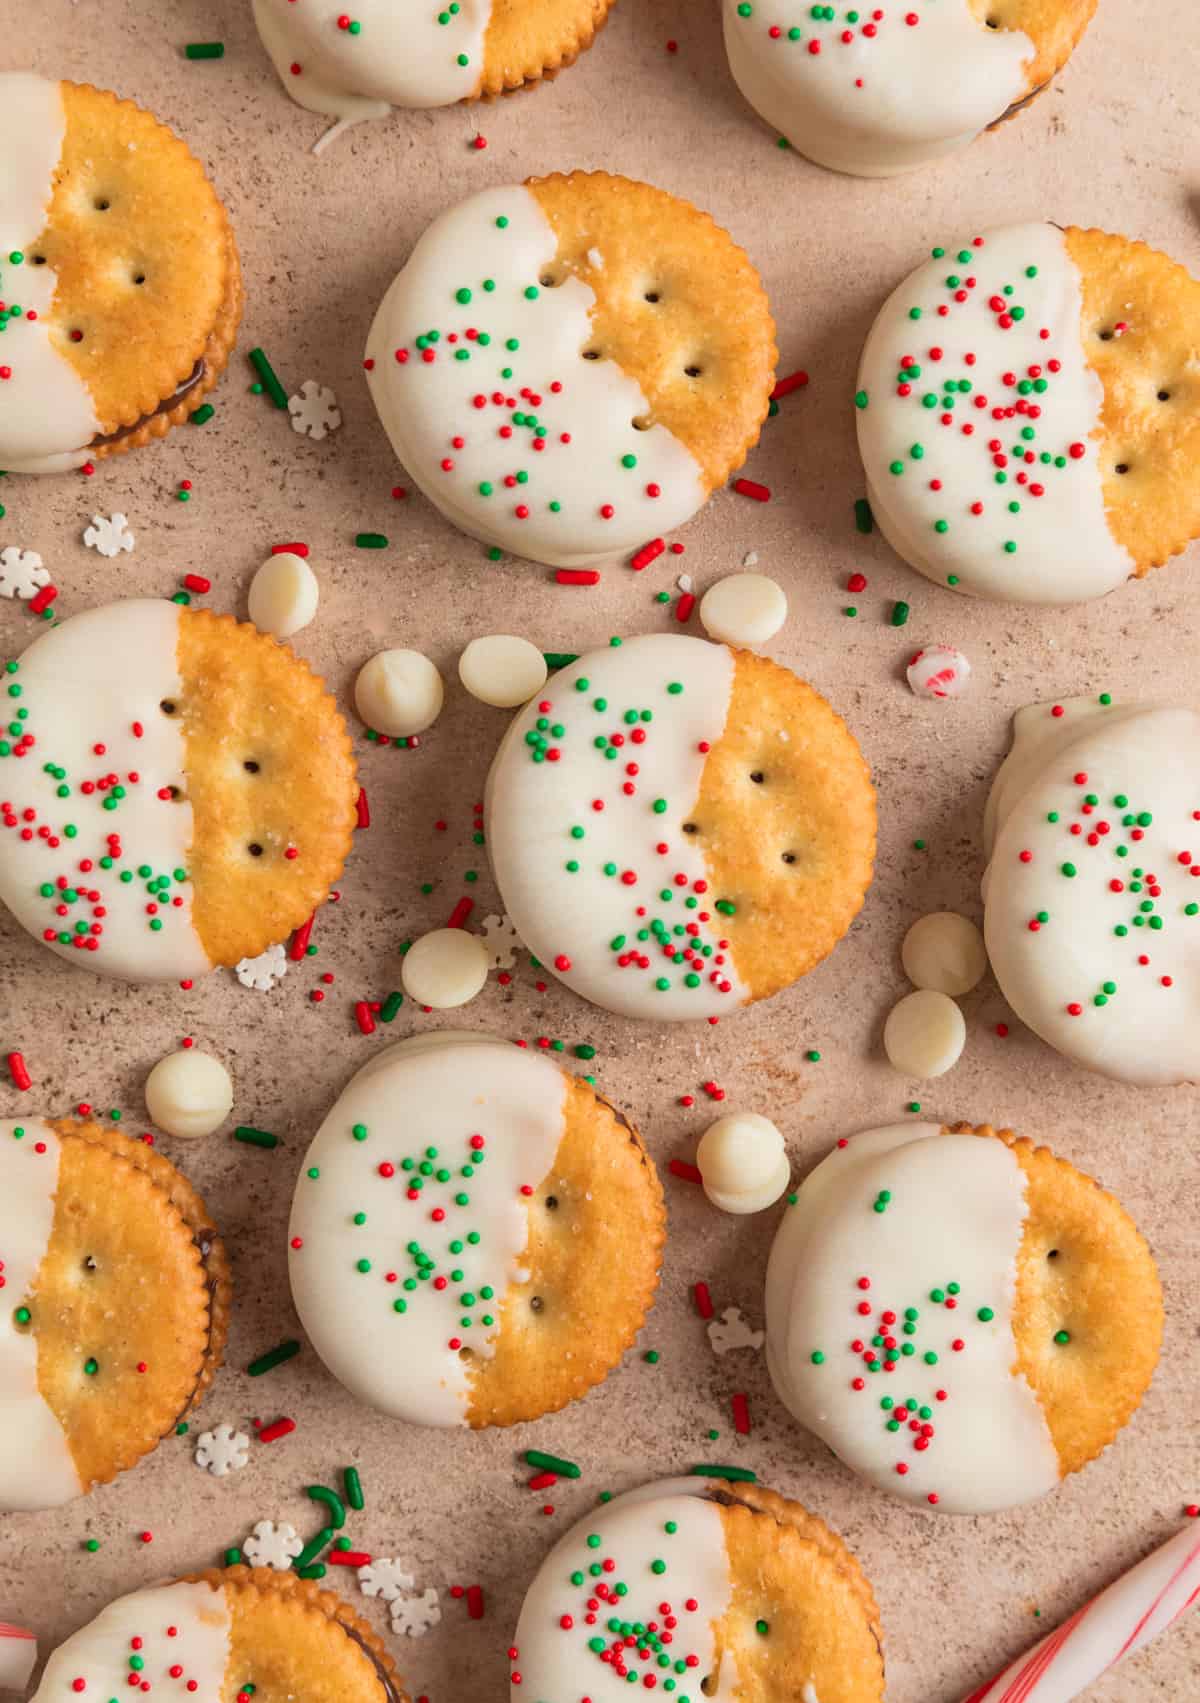 Christmas Ritz cracker cookies dipped in white chocolate and arranged on surface.